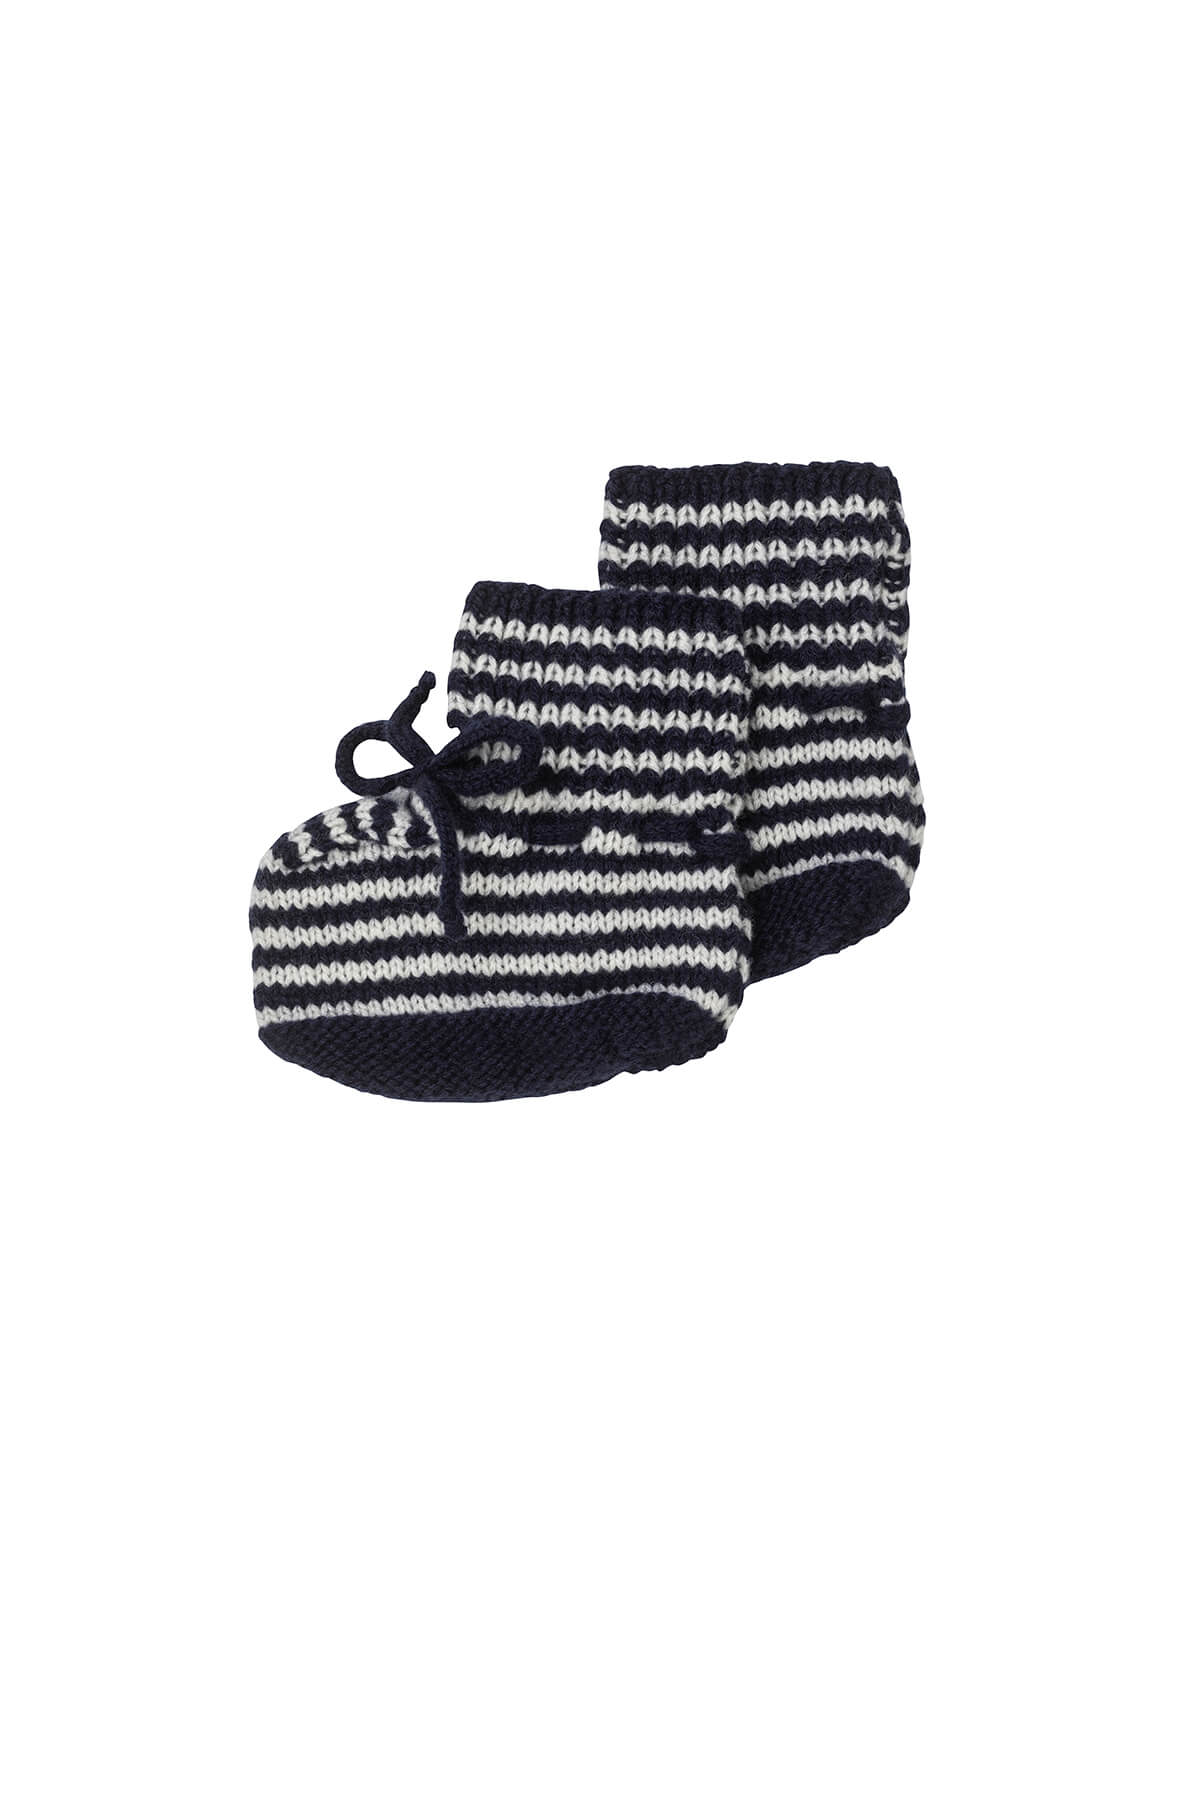 Johnstons of Elgin Hand Knitted Cashmere Baby Booties with crotched trims in Navy & White on a white background 746330333